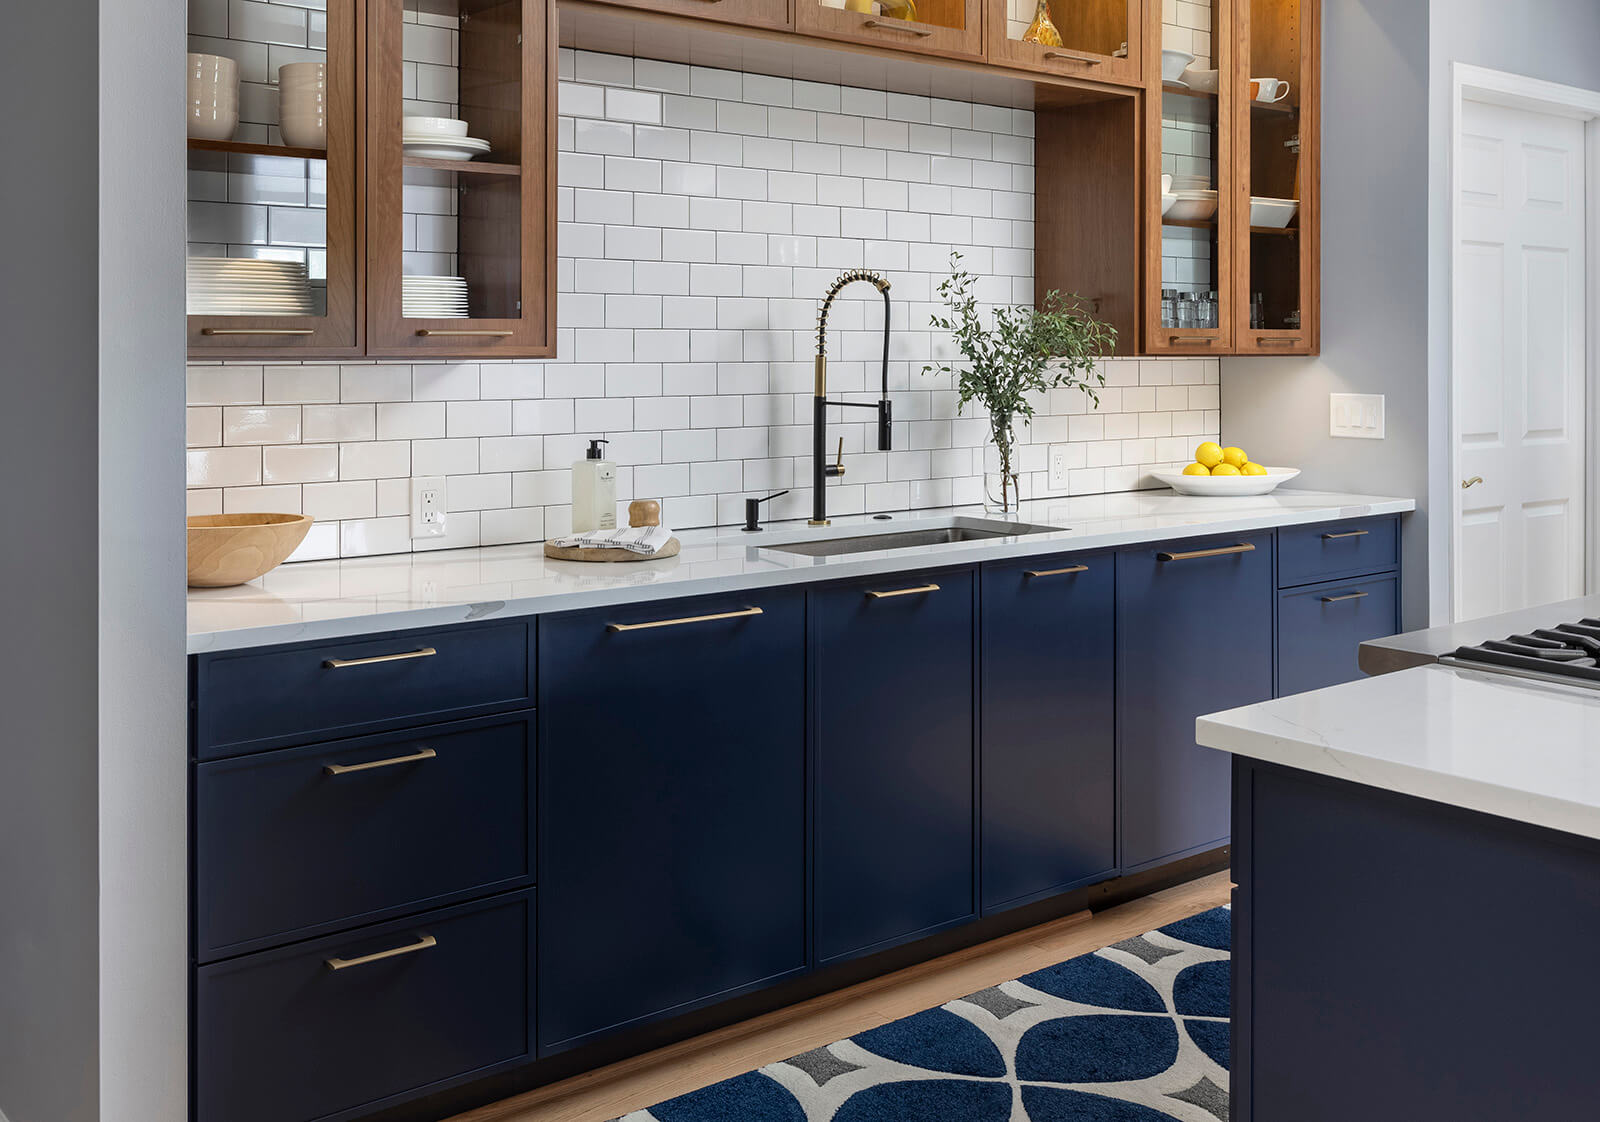 A navy blue and warm wood kitchen design with a hidden panel ready dishwasher with a skinny shaker door style for the appliance panel.